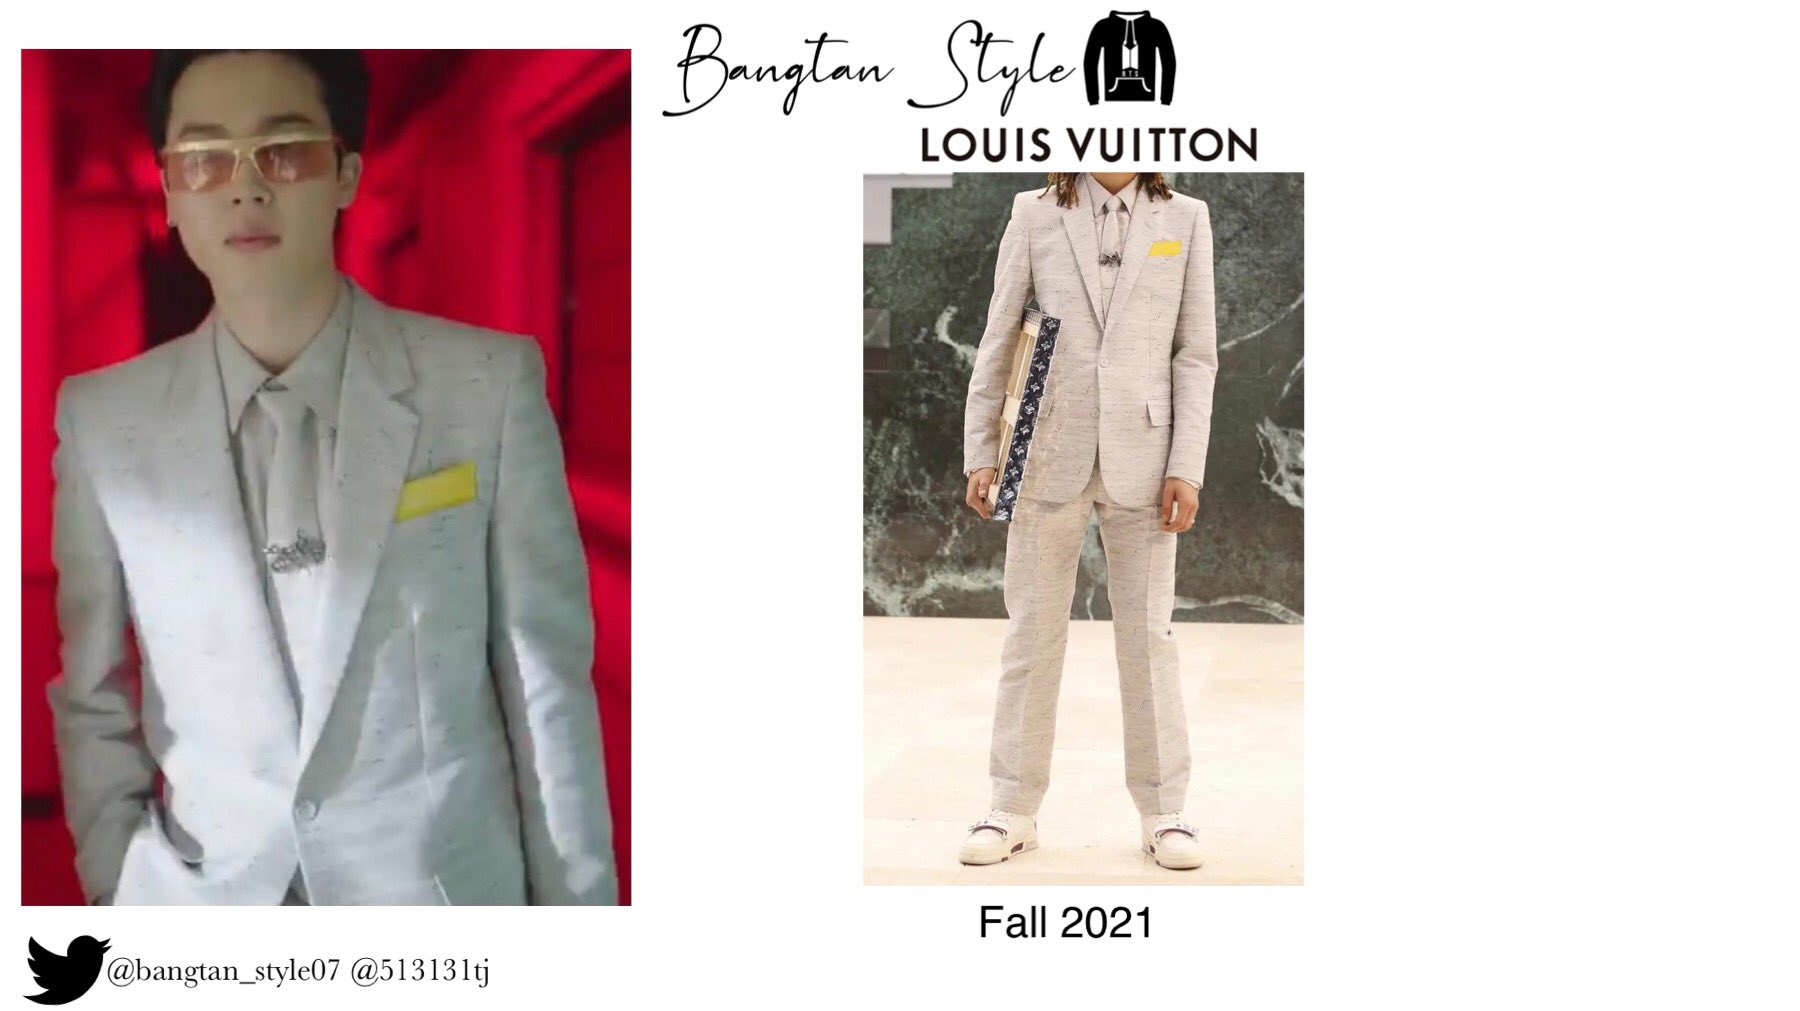 Bangtan Style⁷ (slow) on X: BTS at GRAMMYs 2021 Red Carpet Louis Vuitton  Fall 2021 Menswear Collection #RM #SUGA #JIN #LightltUpBTS  #BTSOurGreatestPrize @BTS_twt  / X